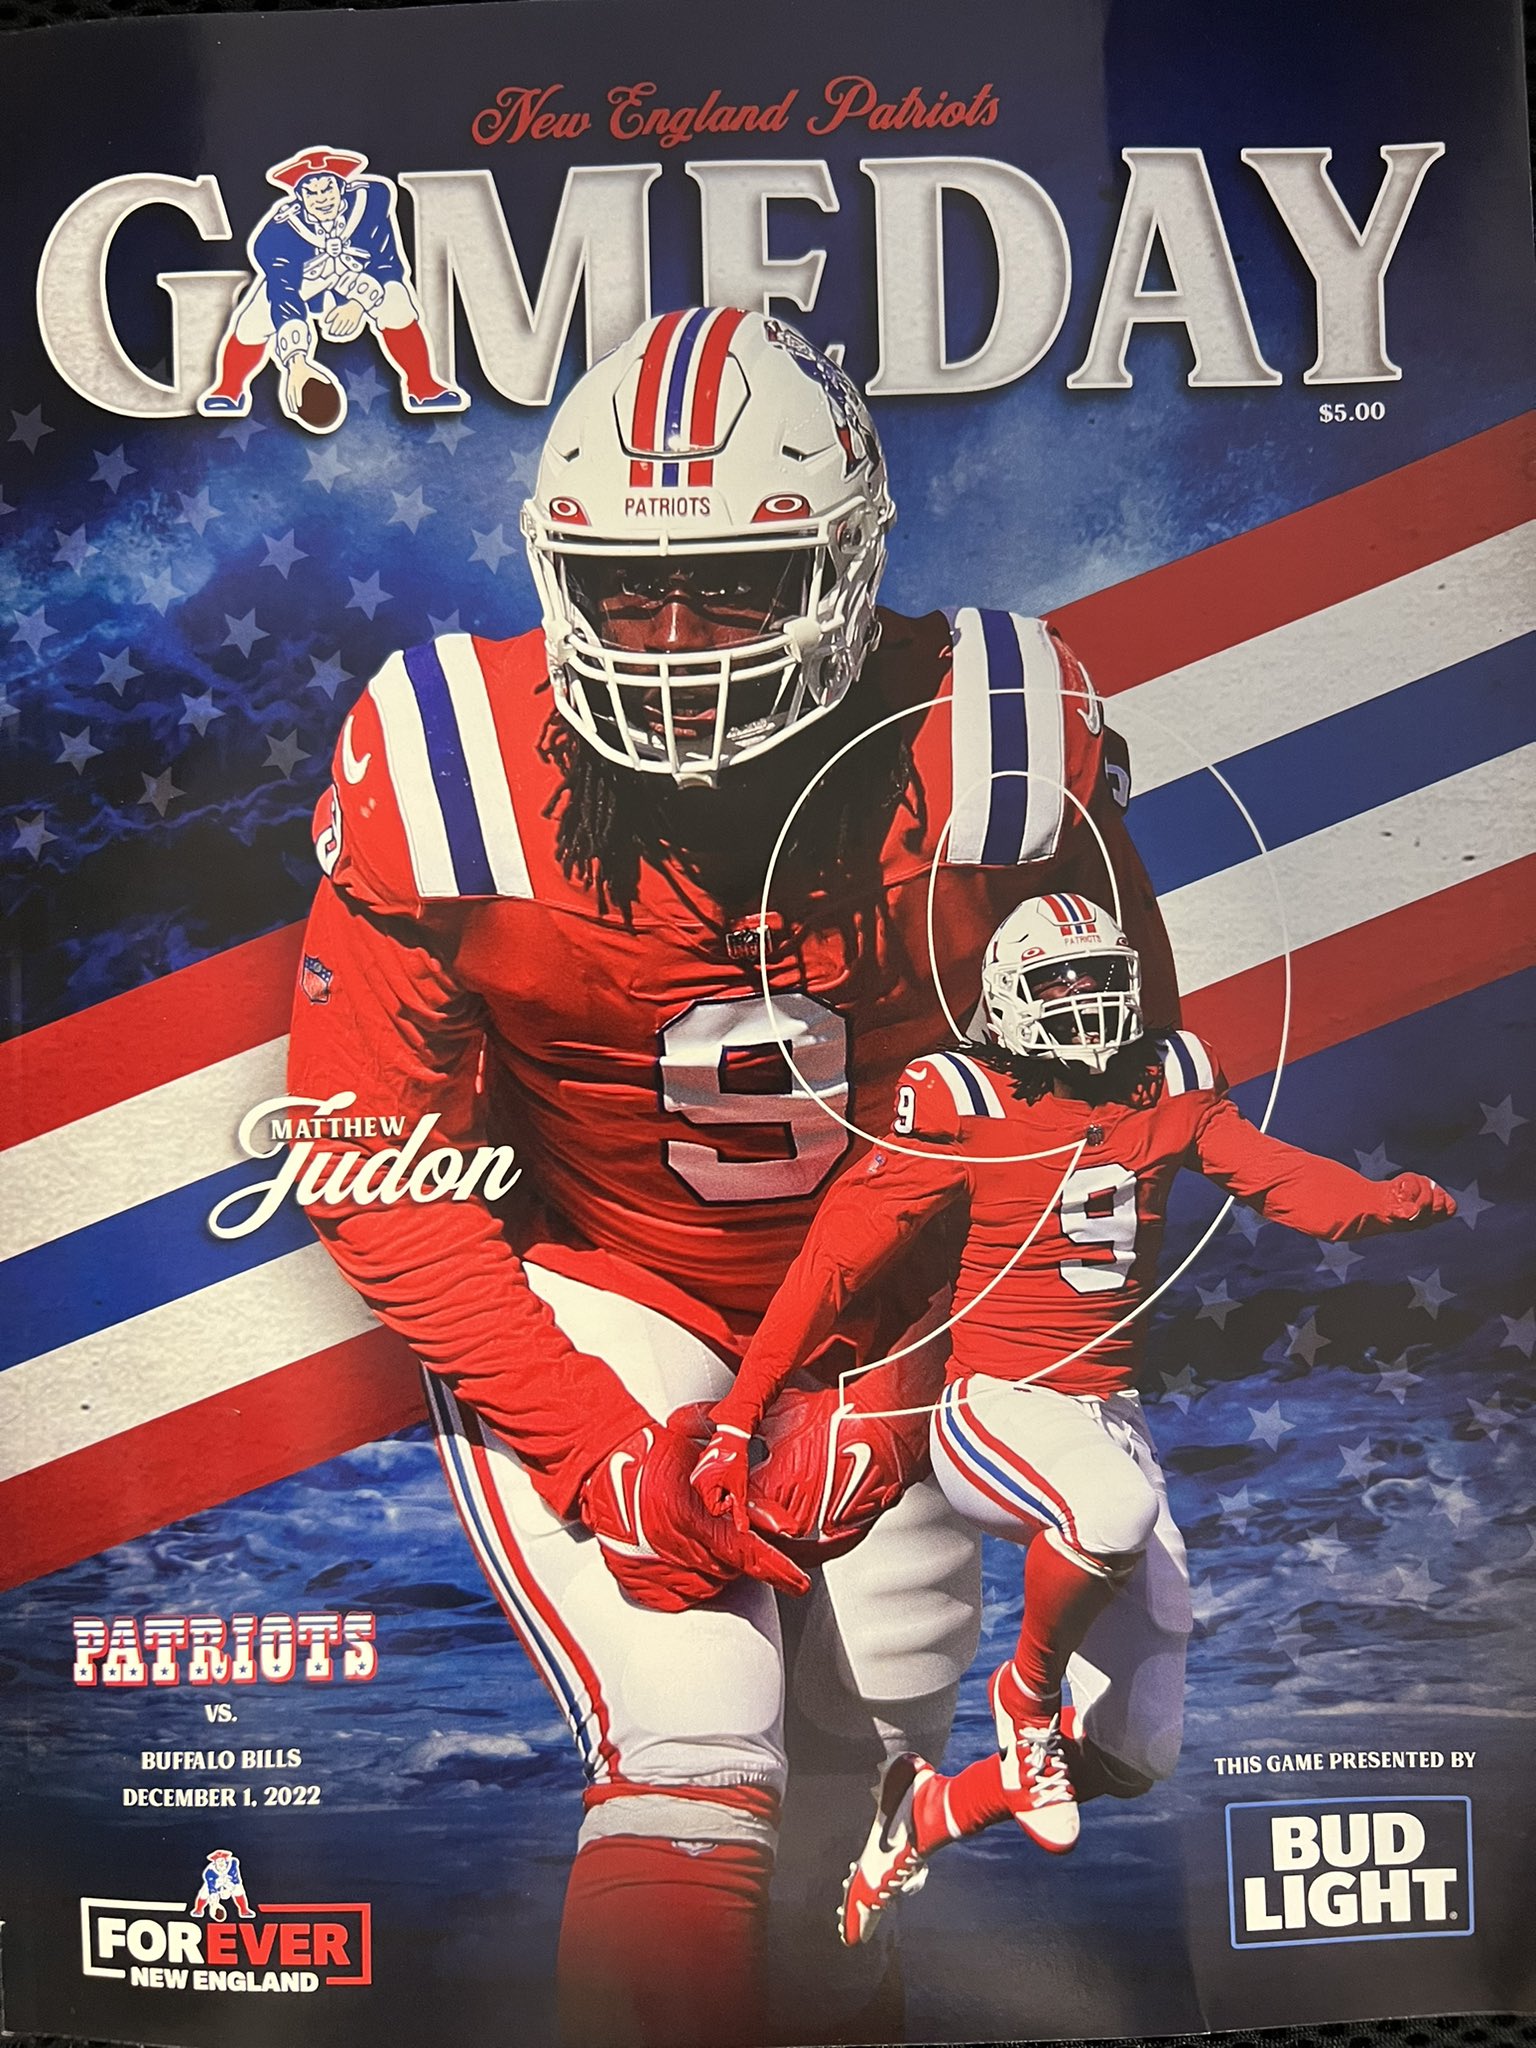 Mike Reiss Judon, who leads the NFL in sacks with is on the cover of the GameDay magazine to be sold at Gillette Stadium tonight